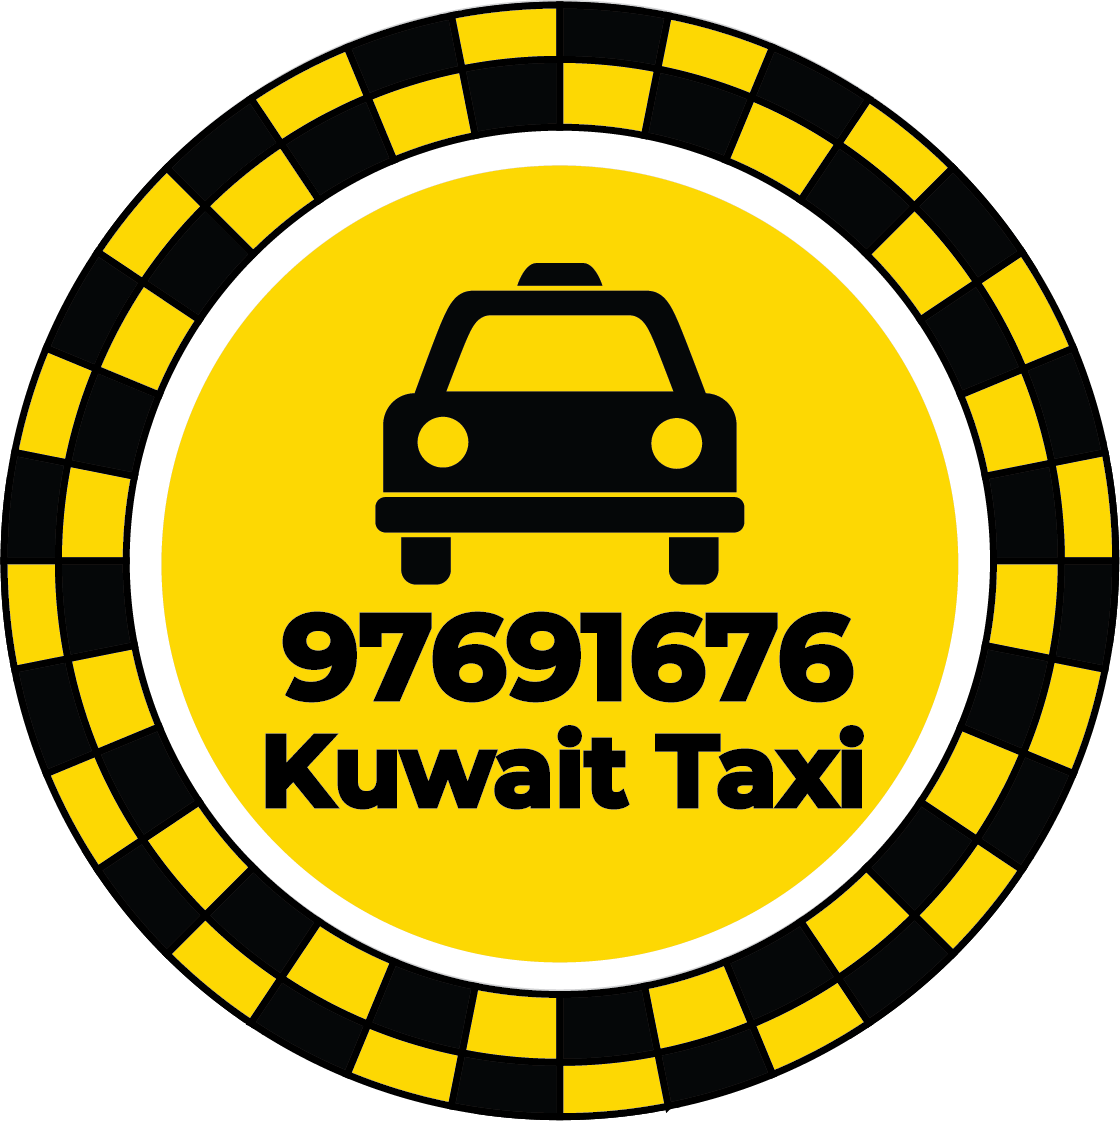  Taxi Numbers in Kuwait - Taxi Fare in Kuwait